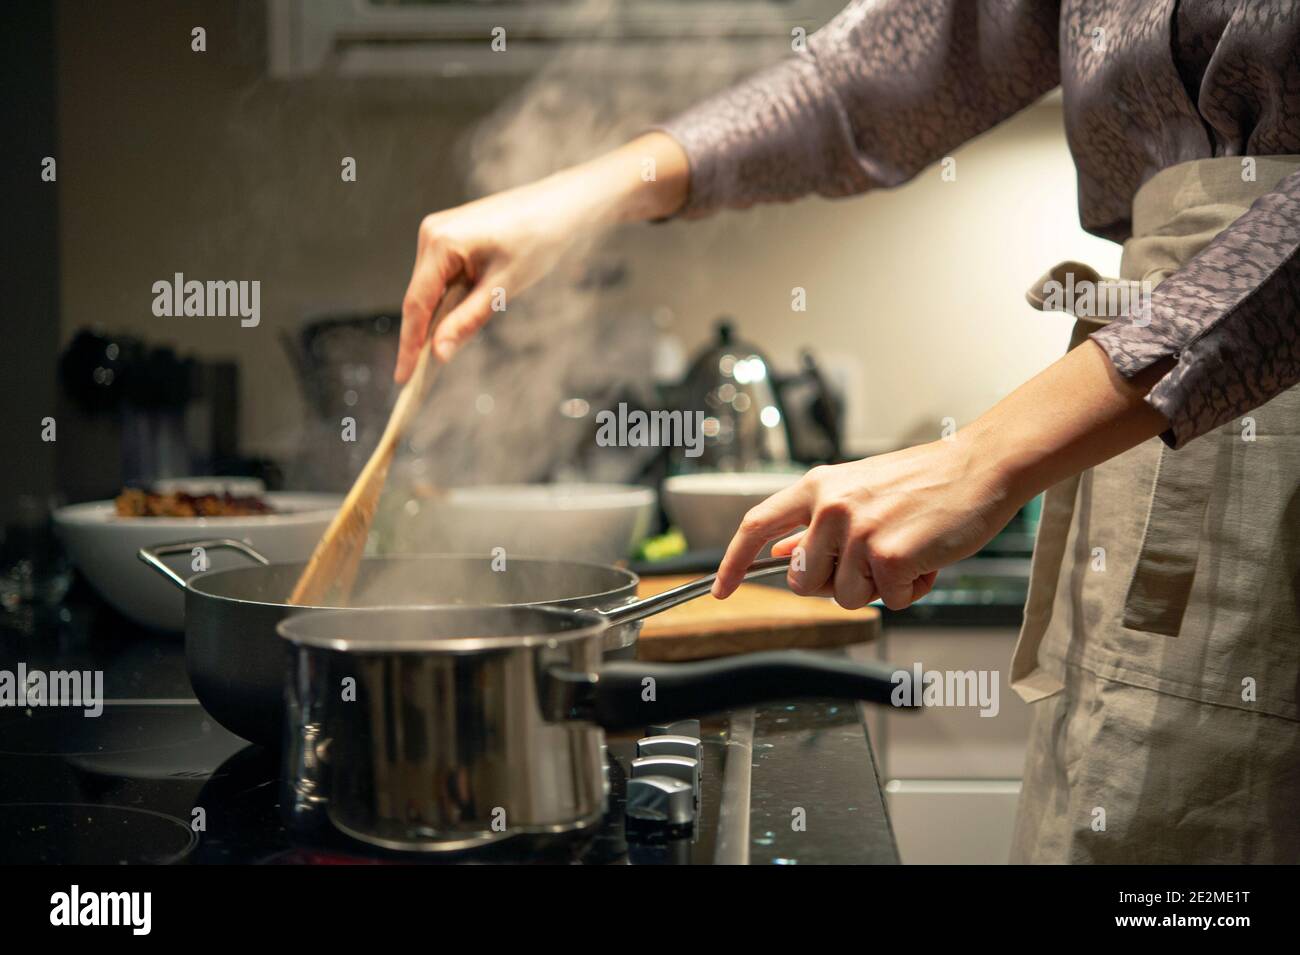 Woman in apron cooking on ceramic hob in modern home, close-up of hands stirring pot in kitchen. London, UK Stock Photo